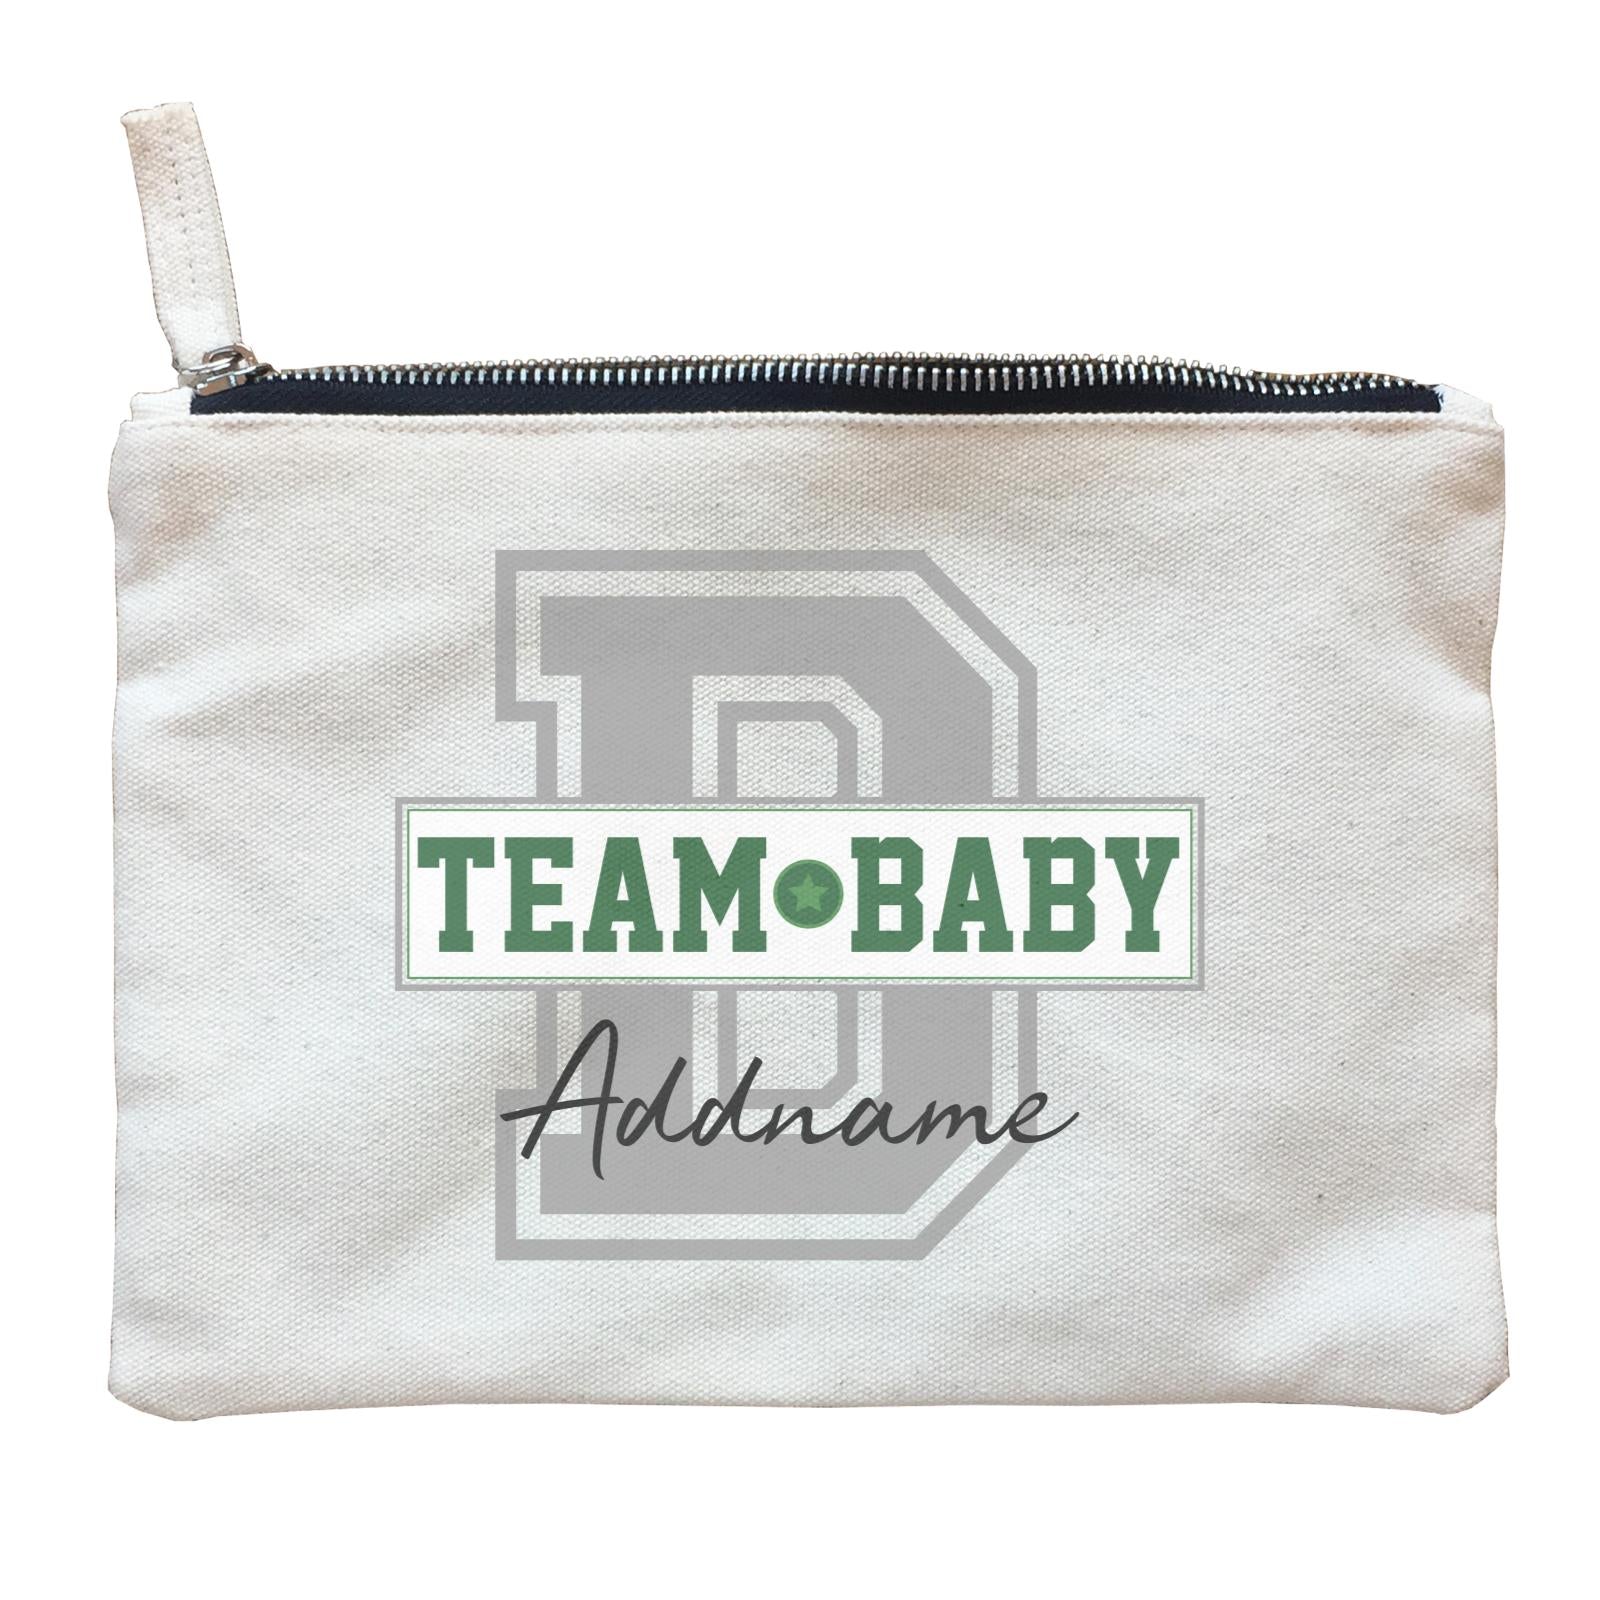 Team Baby Addname Zipper Pouch